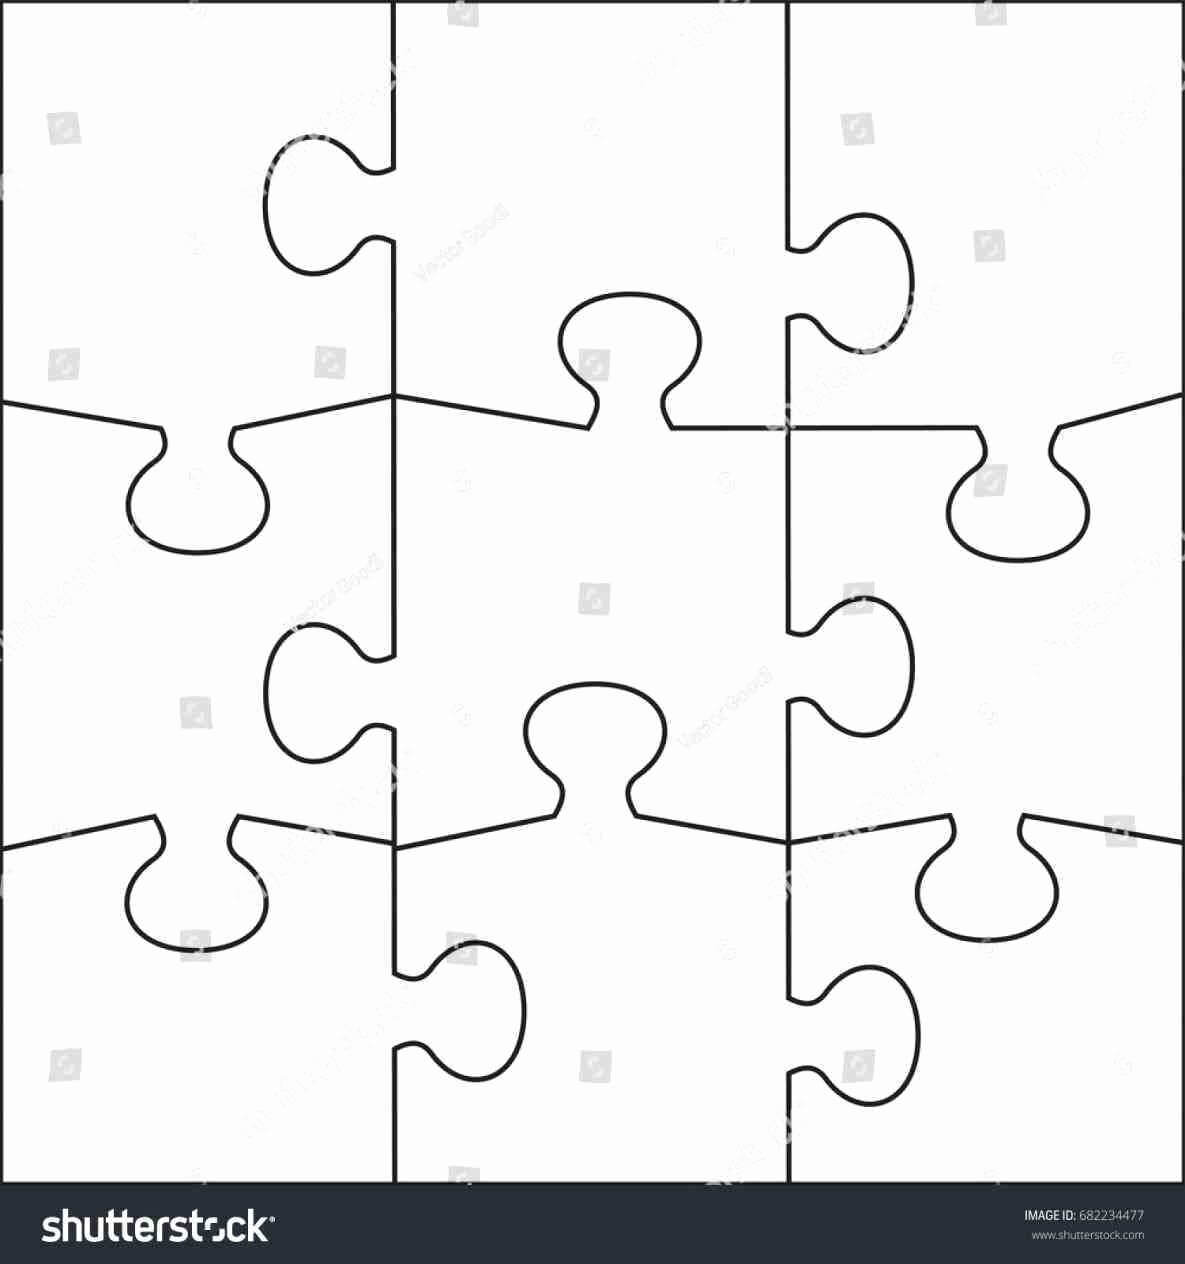 Puzzle Pieces Template For Word Fresh 9 Piece Jigsaw Puzzle With Jigsaw Puzzle Template For Word